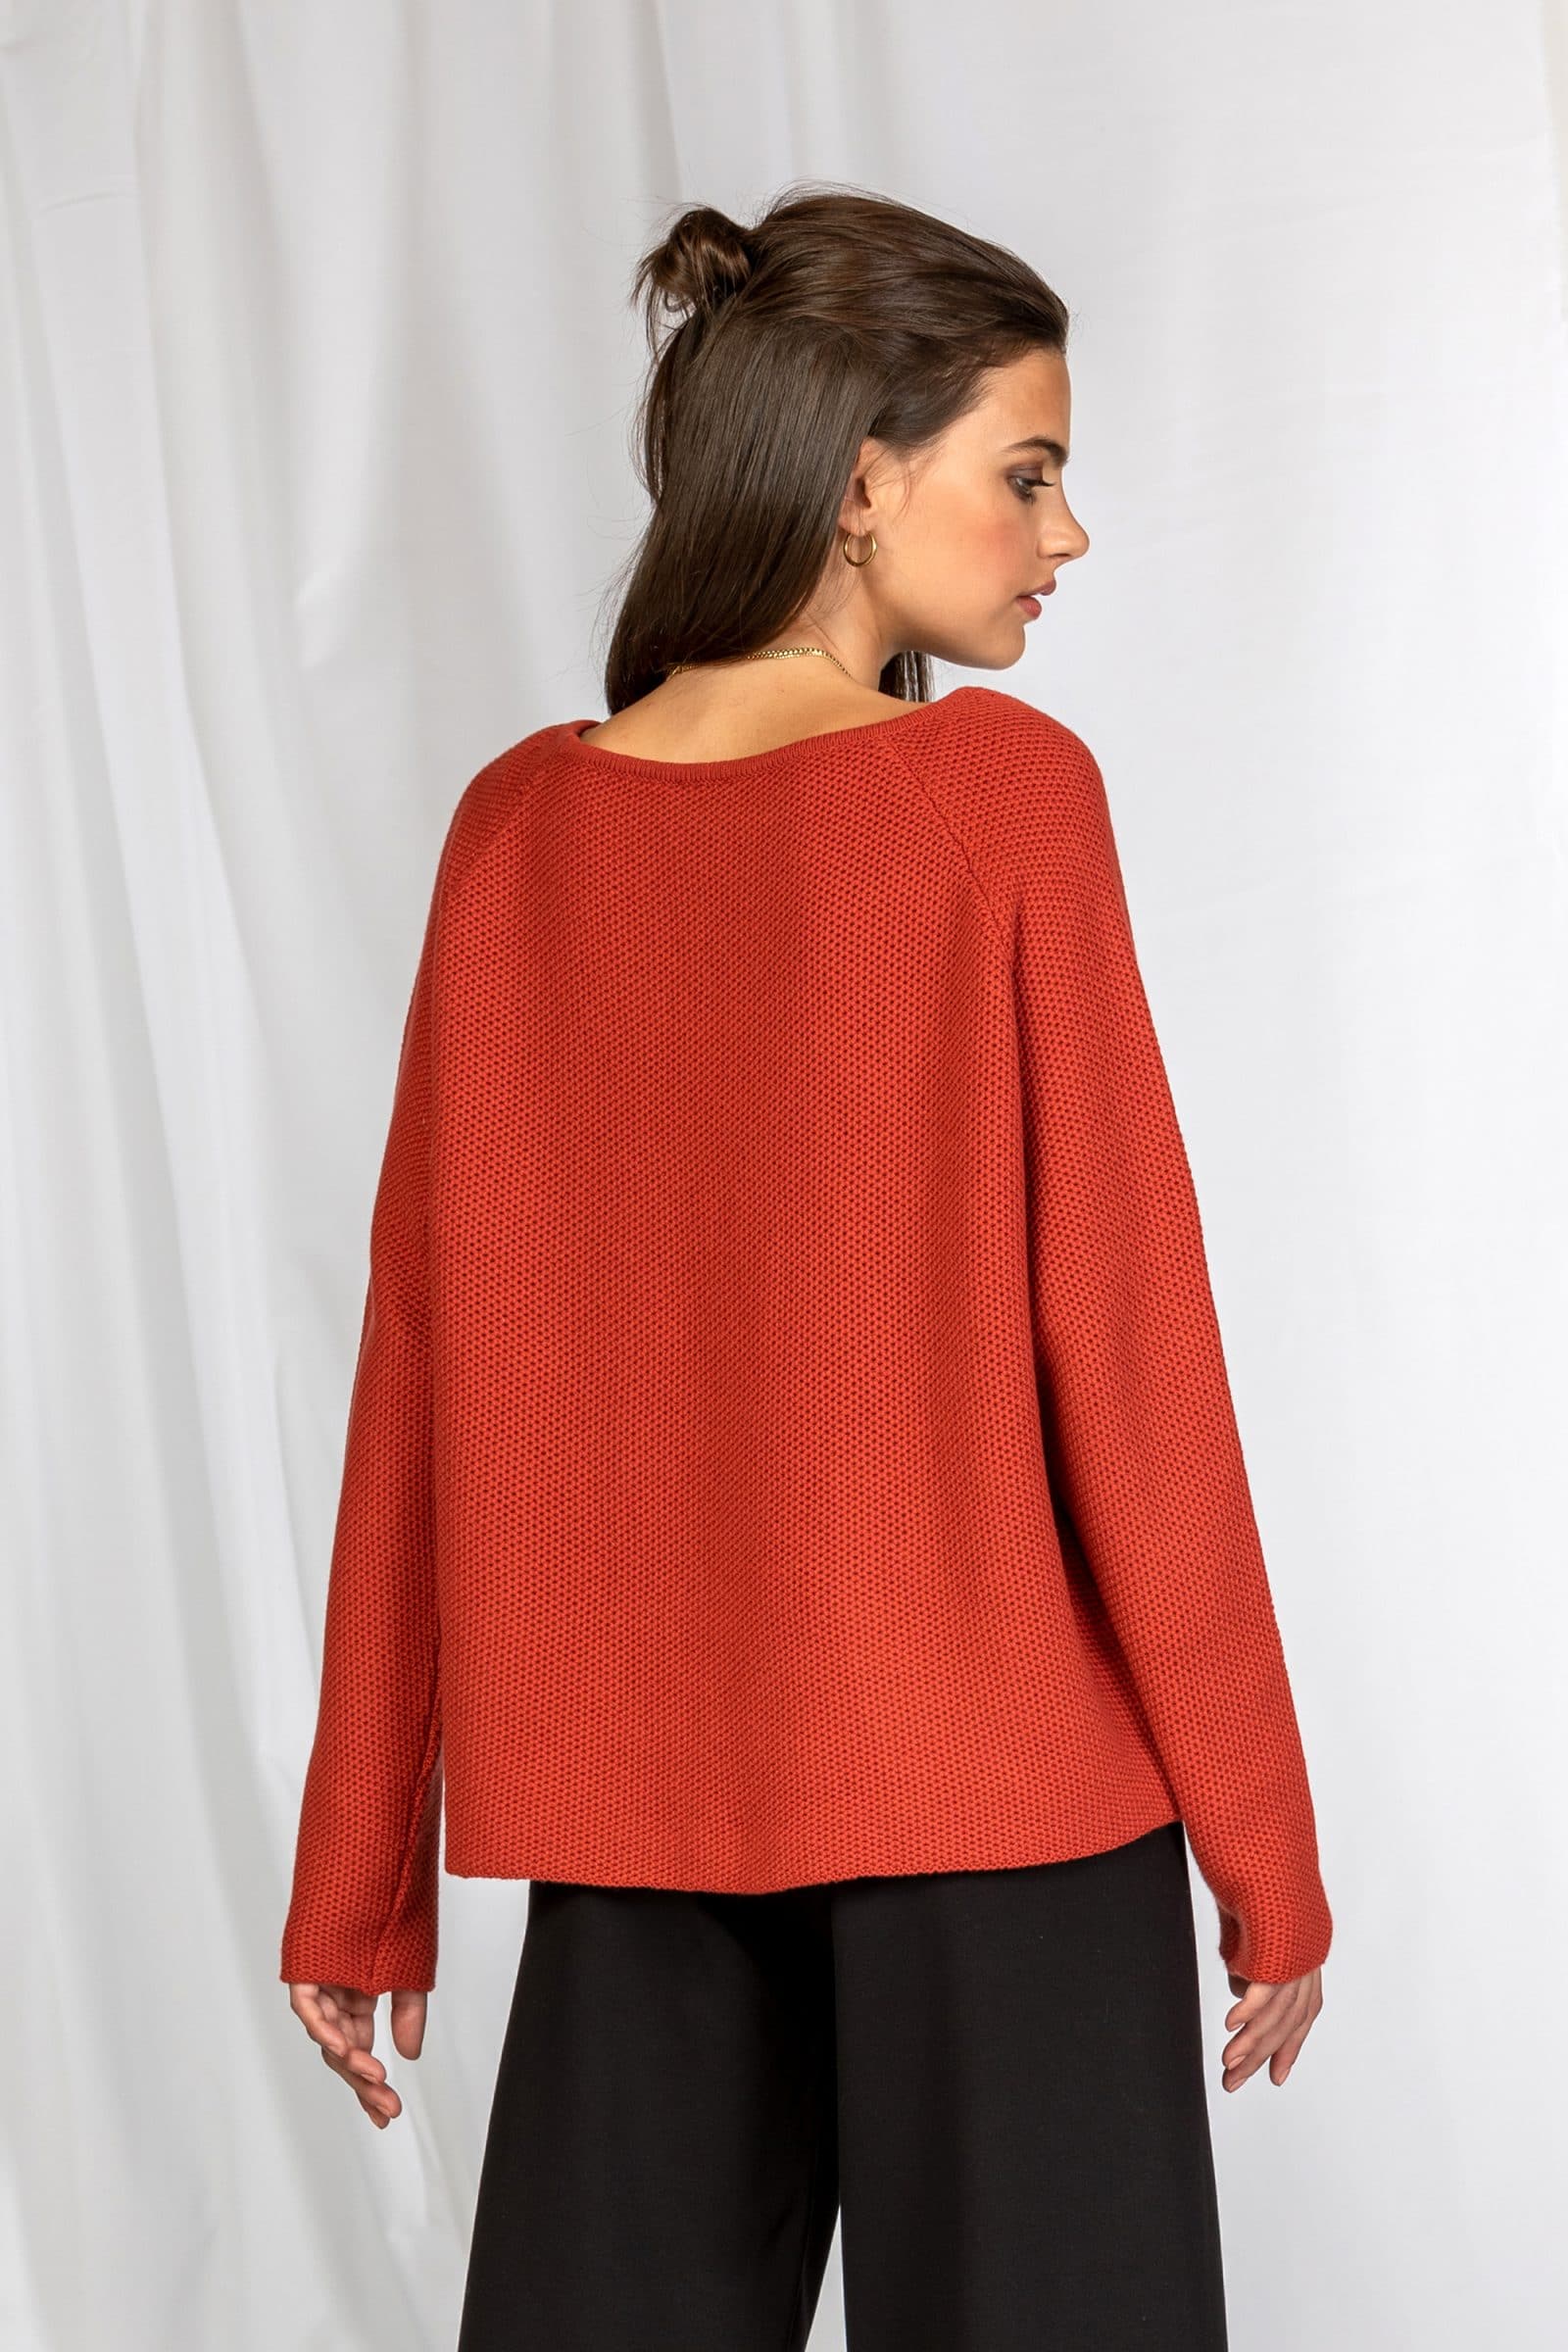 Cashmere sweater red